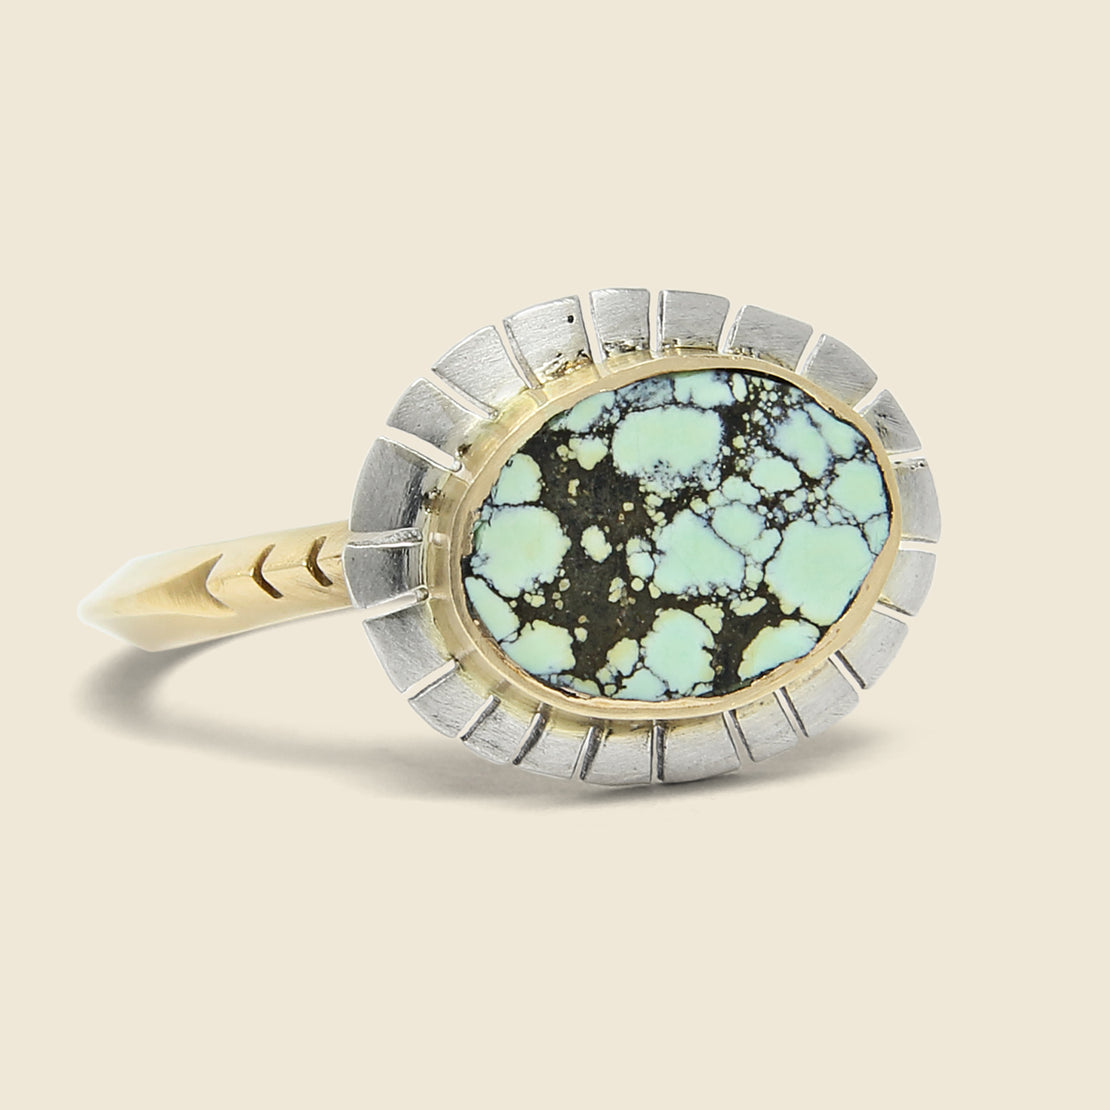 Young in the Mountains Equinox Ring - Peacock Turquoise